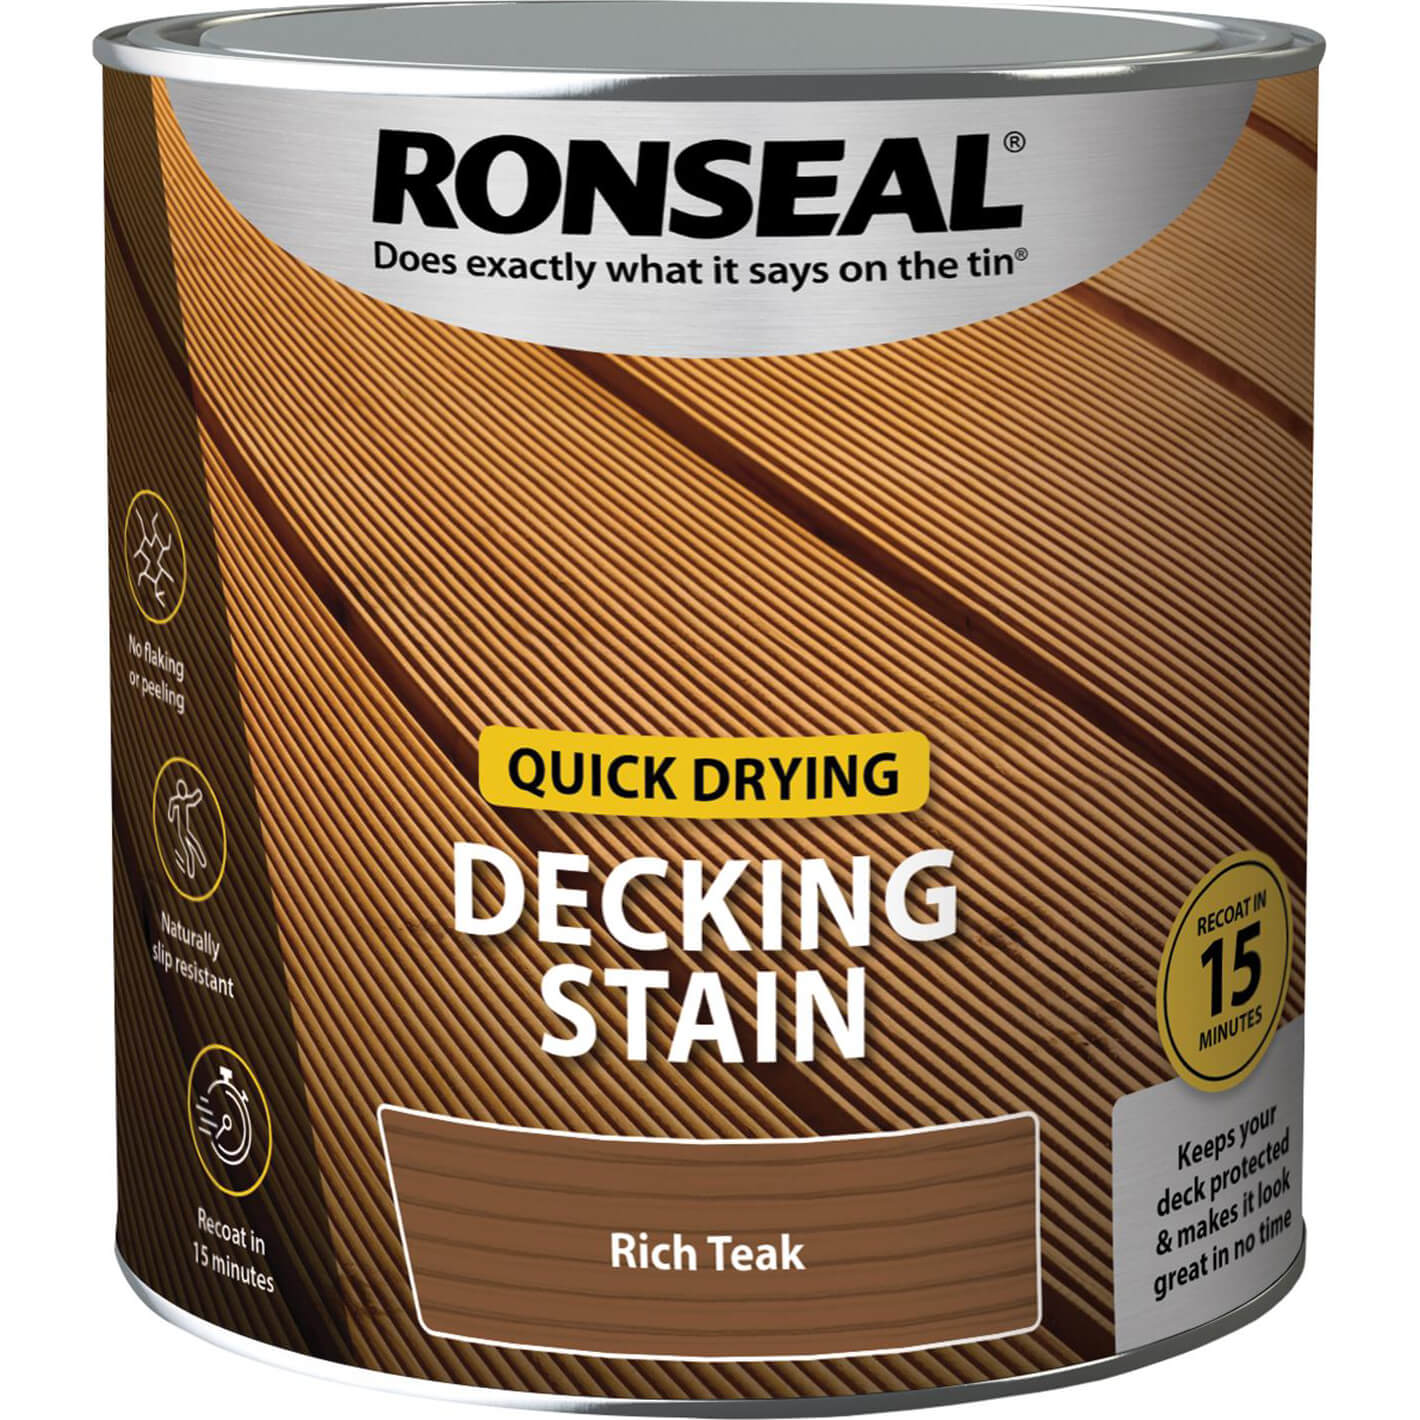 Image of Ronseal Quick Drying Decking Stain 2.5l Rich Teak